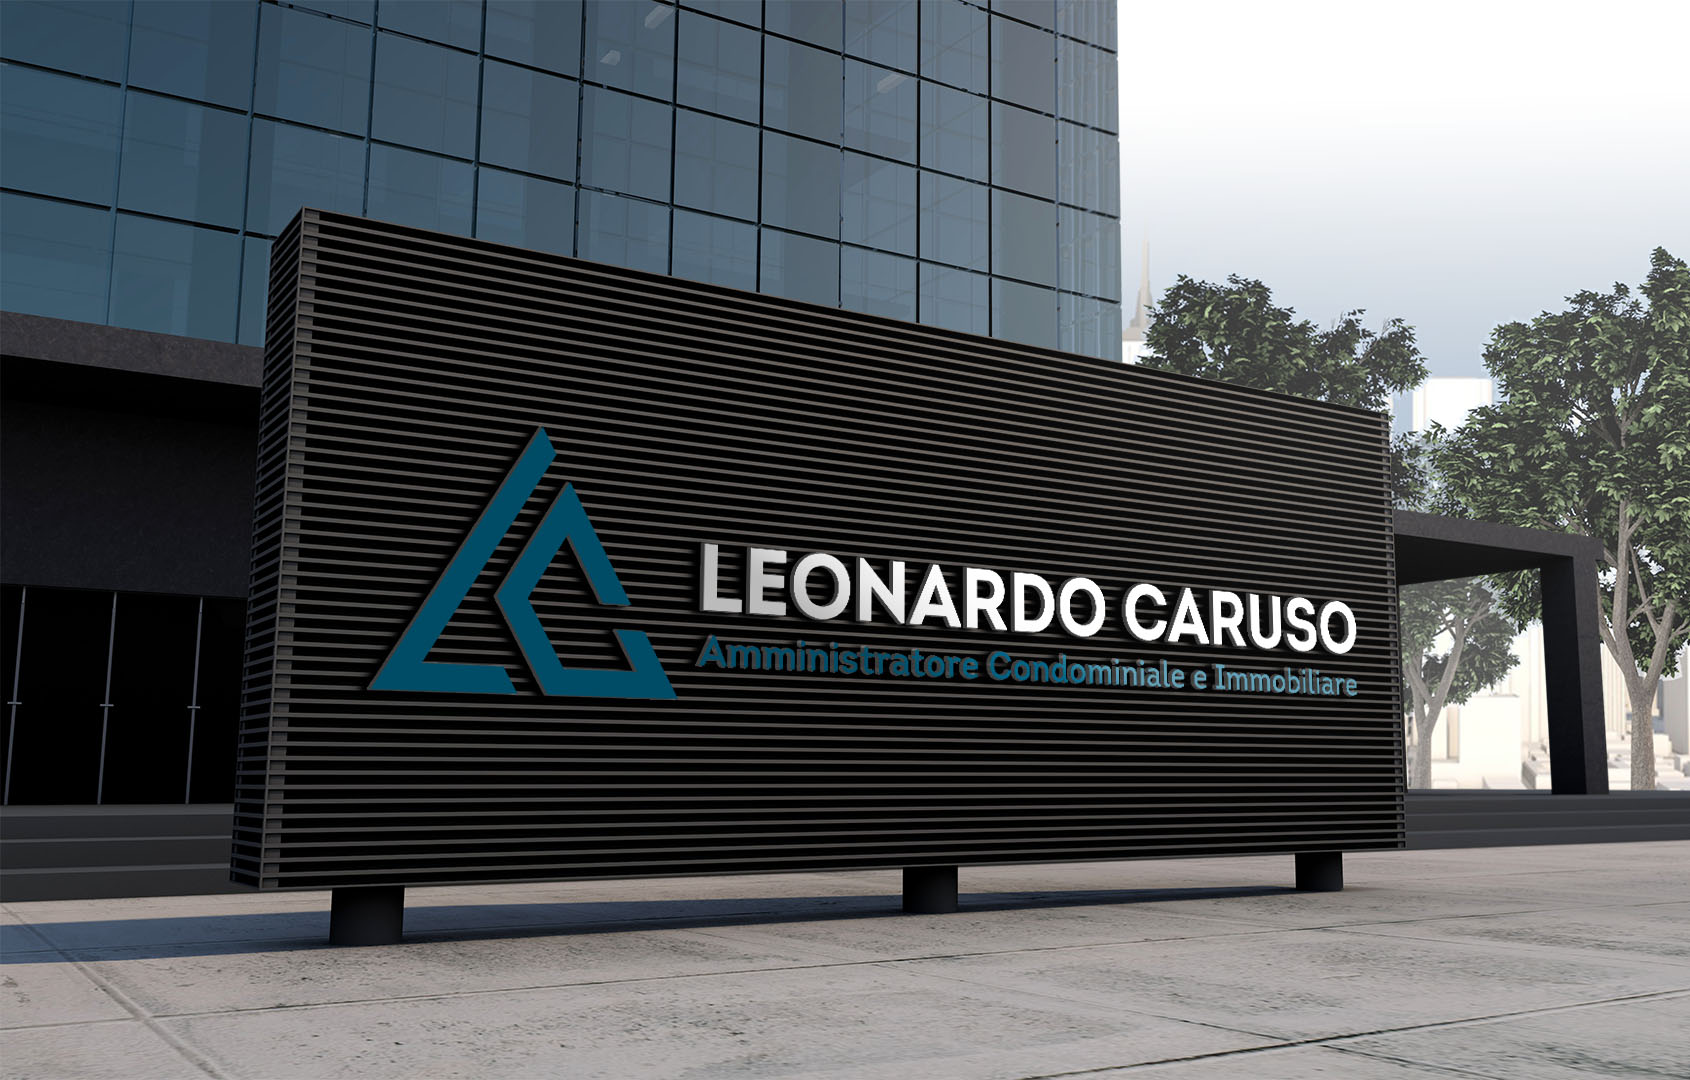 Mockup 3d logo facade sign standing in front of modern building